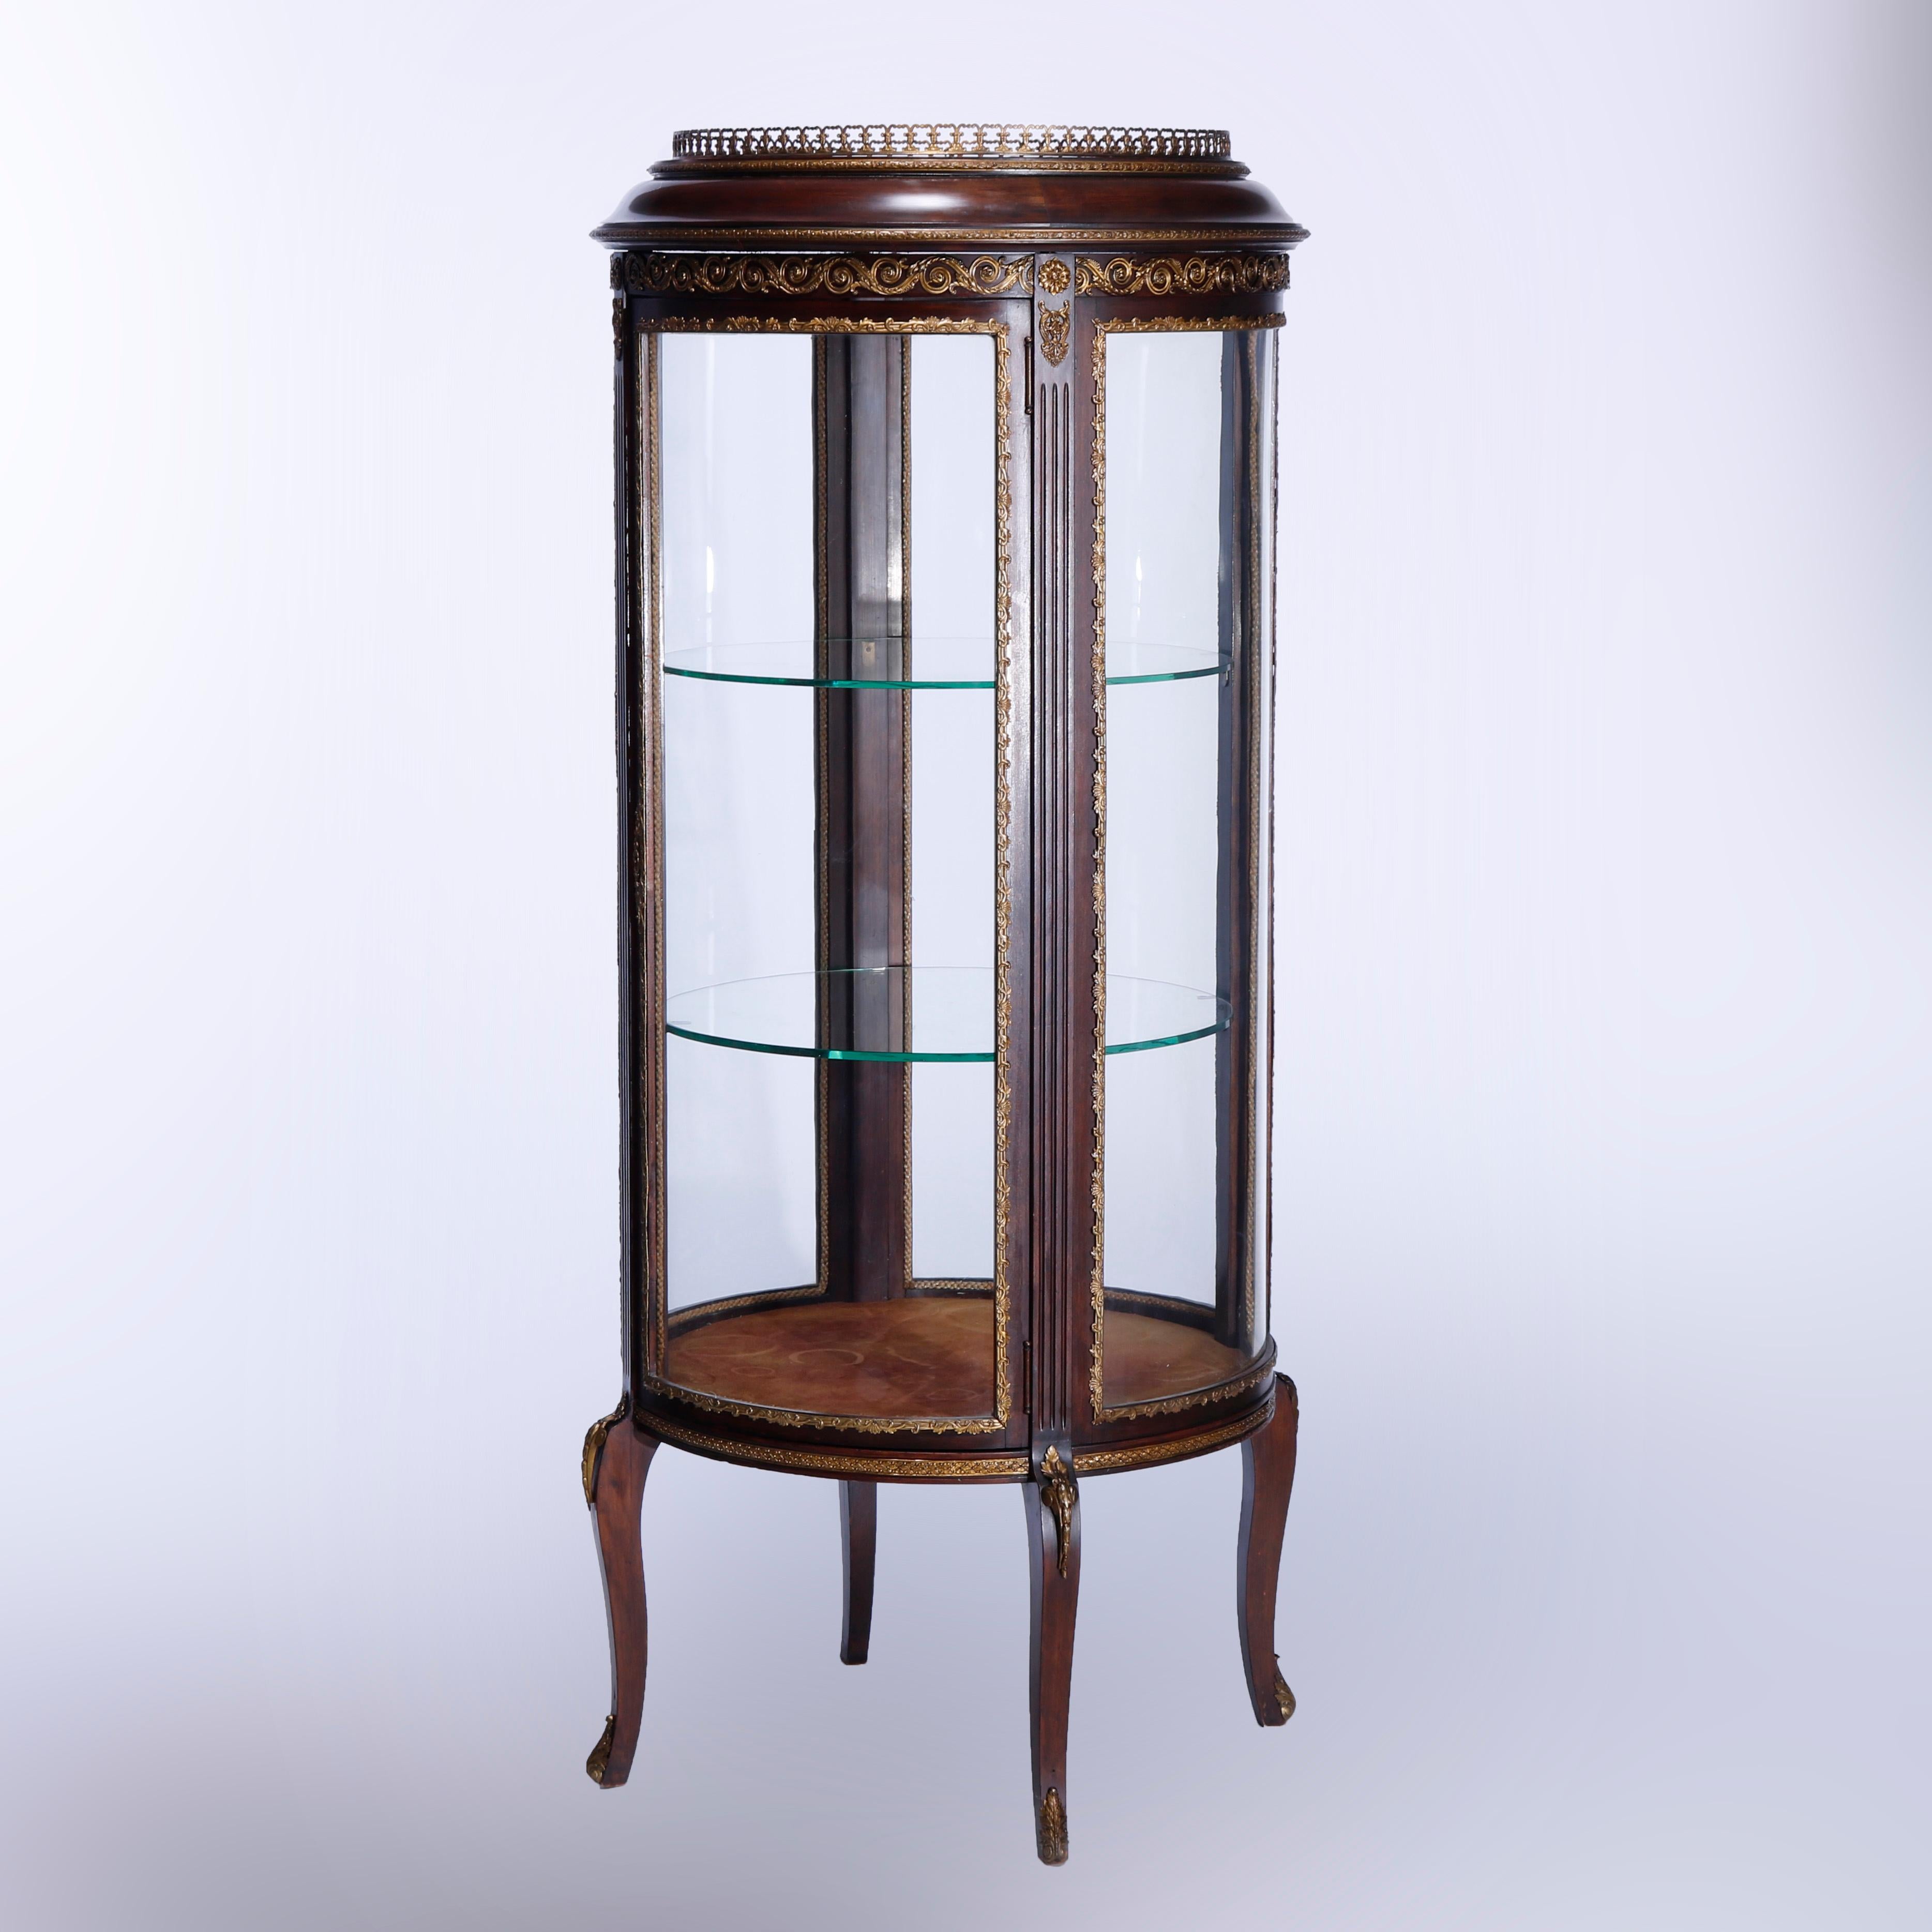 An antique French Louis XVI vitrine offers cast pierced gallery surmounting flame mahogany case in cylindrical form having curved glass, single door opening to shelved interior, cast foliate ormolu throughout, reeded columns, and raised on cabriole